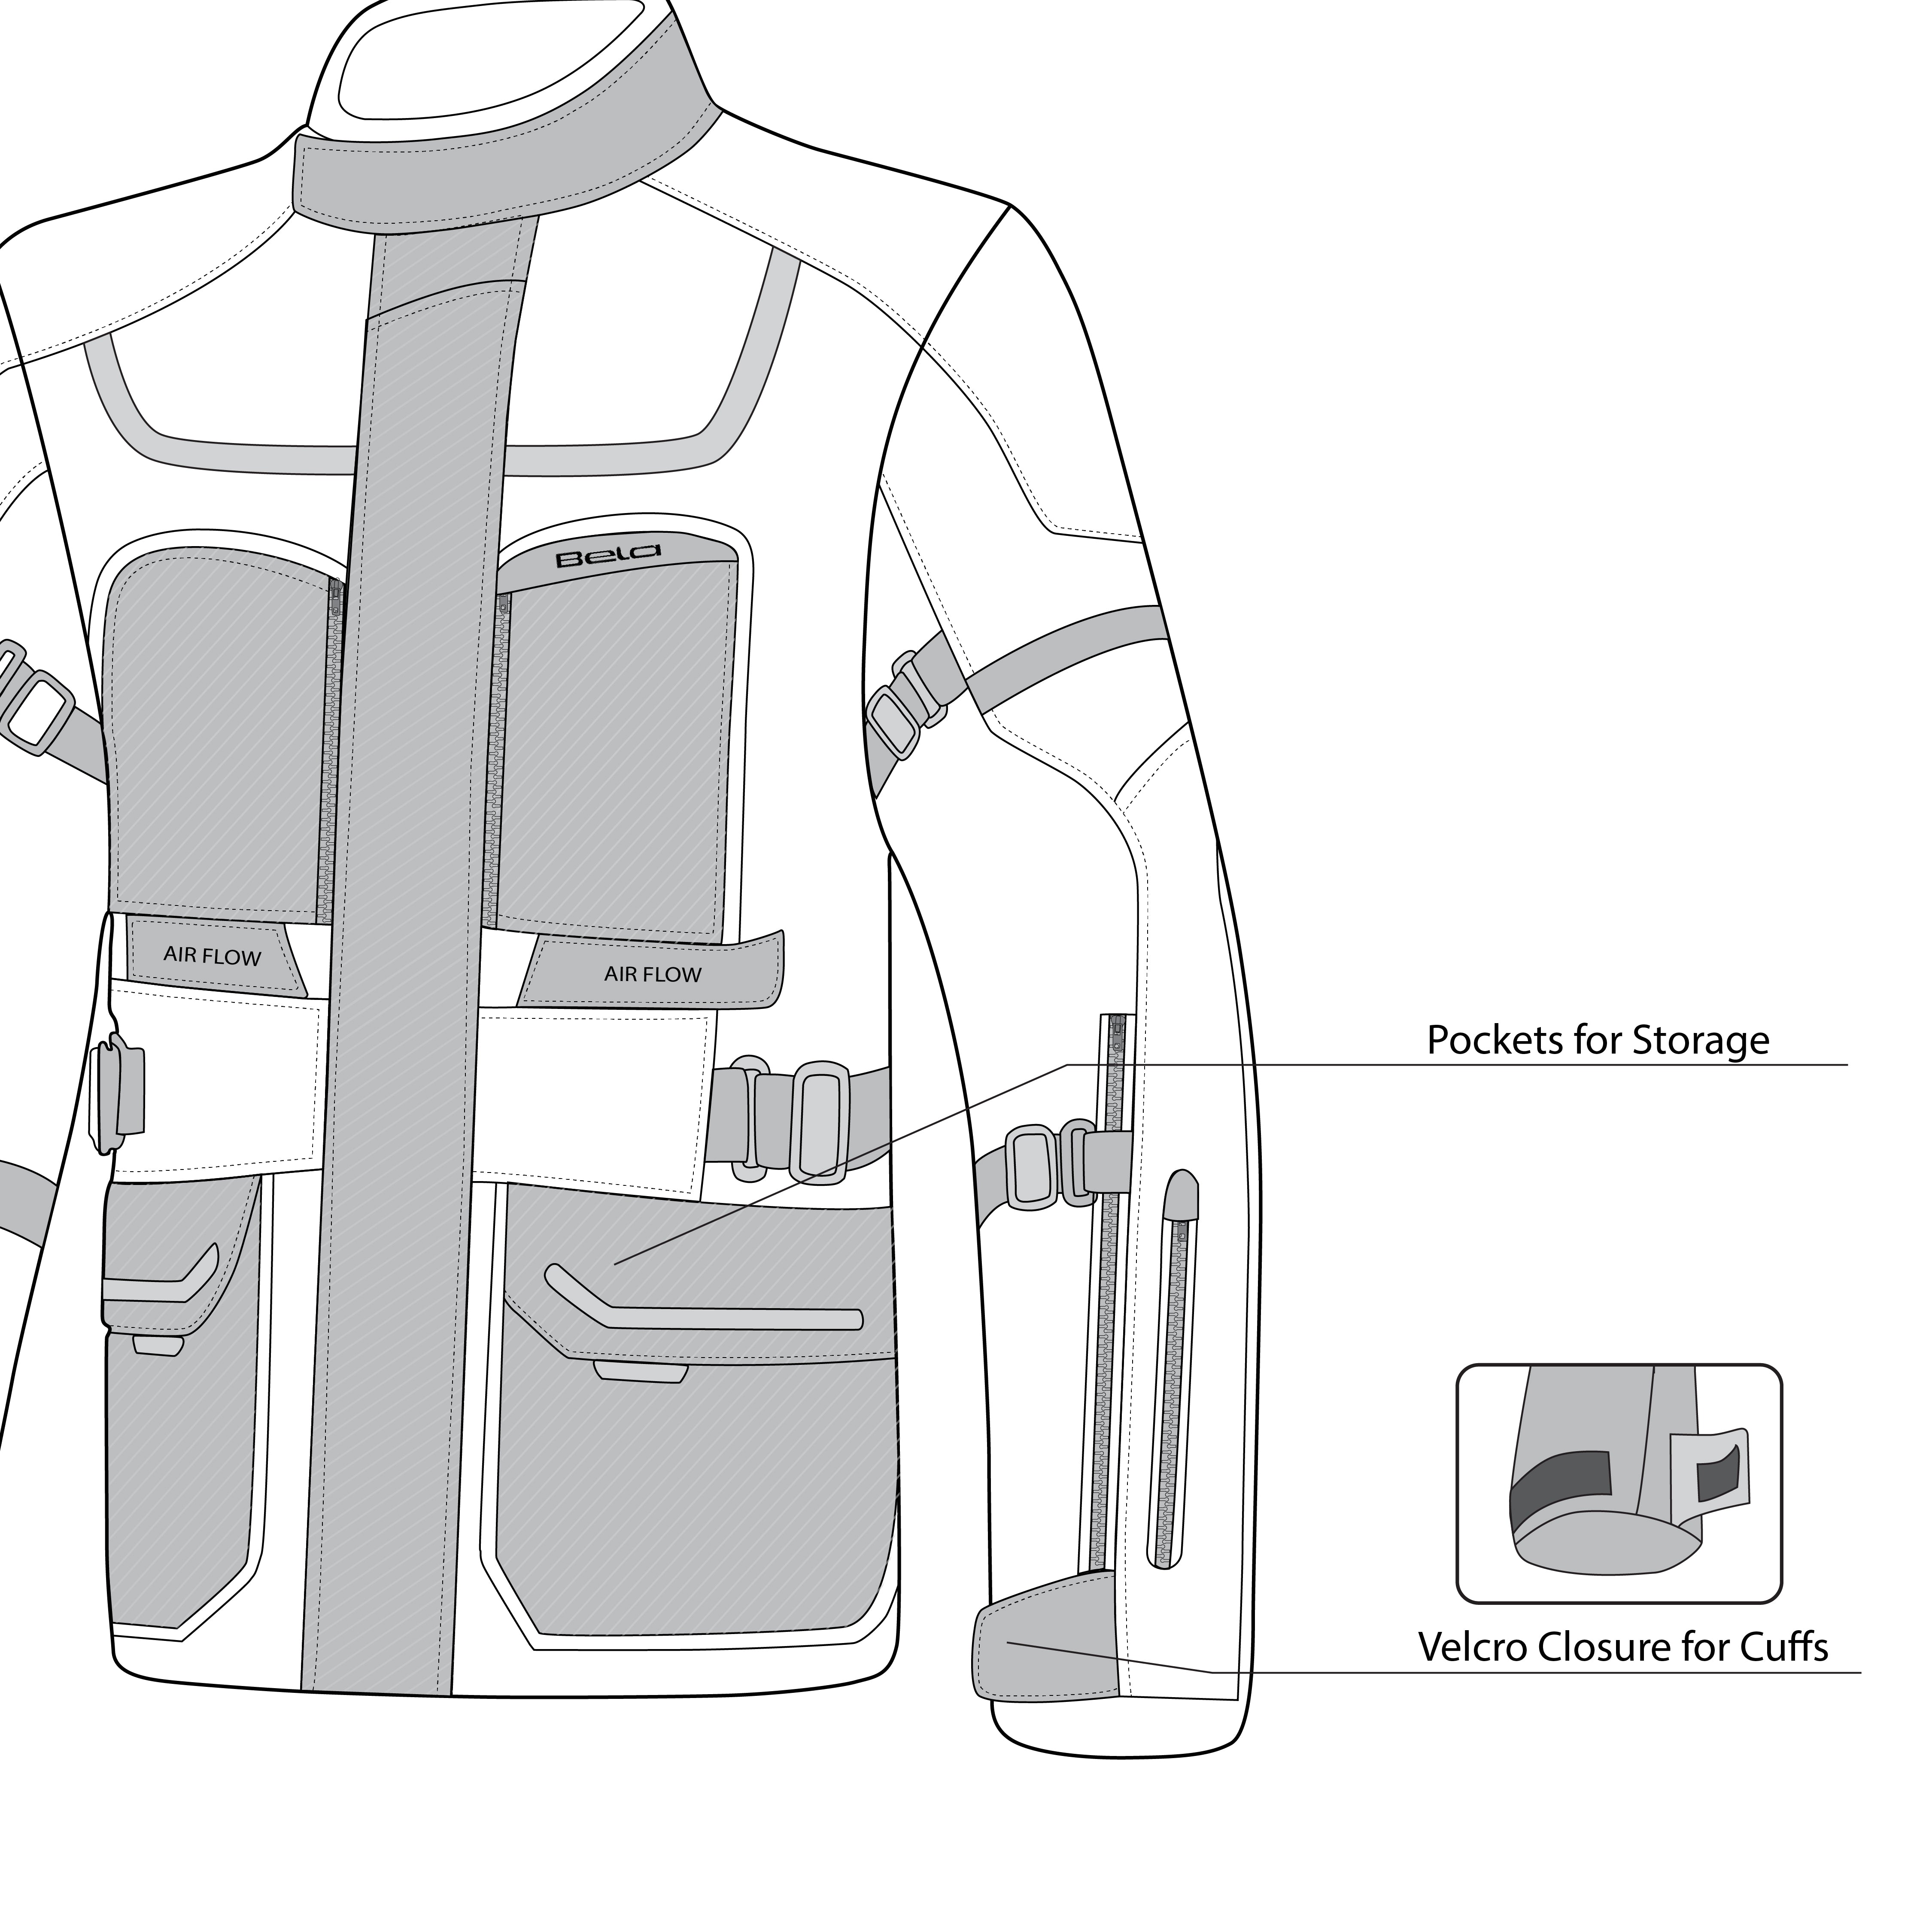 infographic sketch bela transformer the winter jacket ice, black and blue front bottom side view